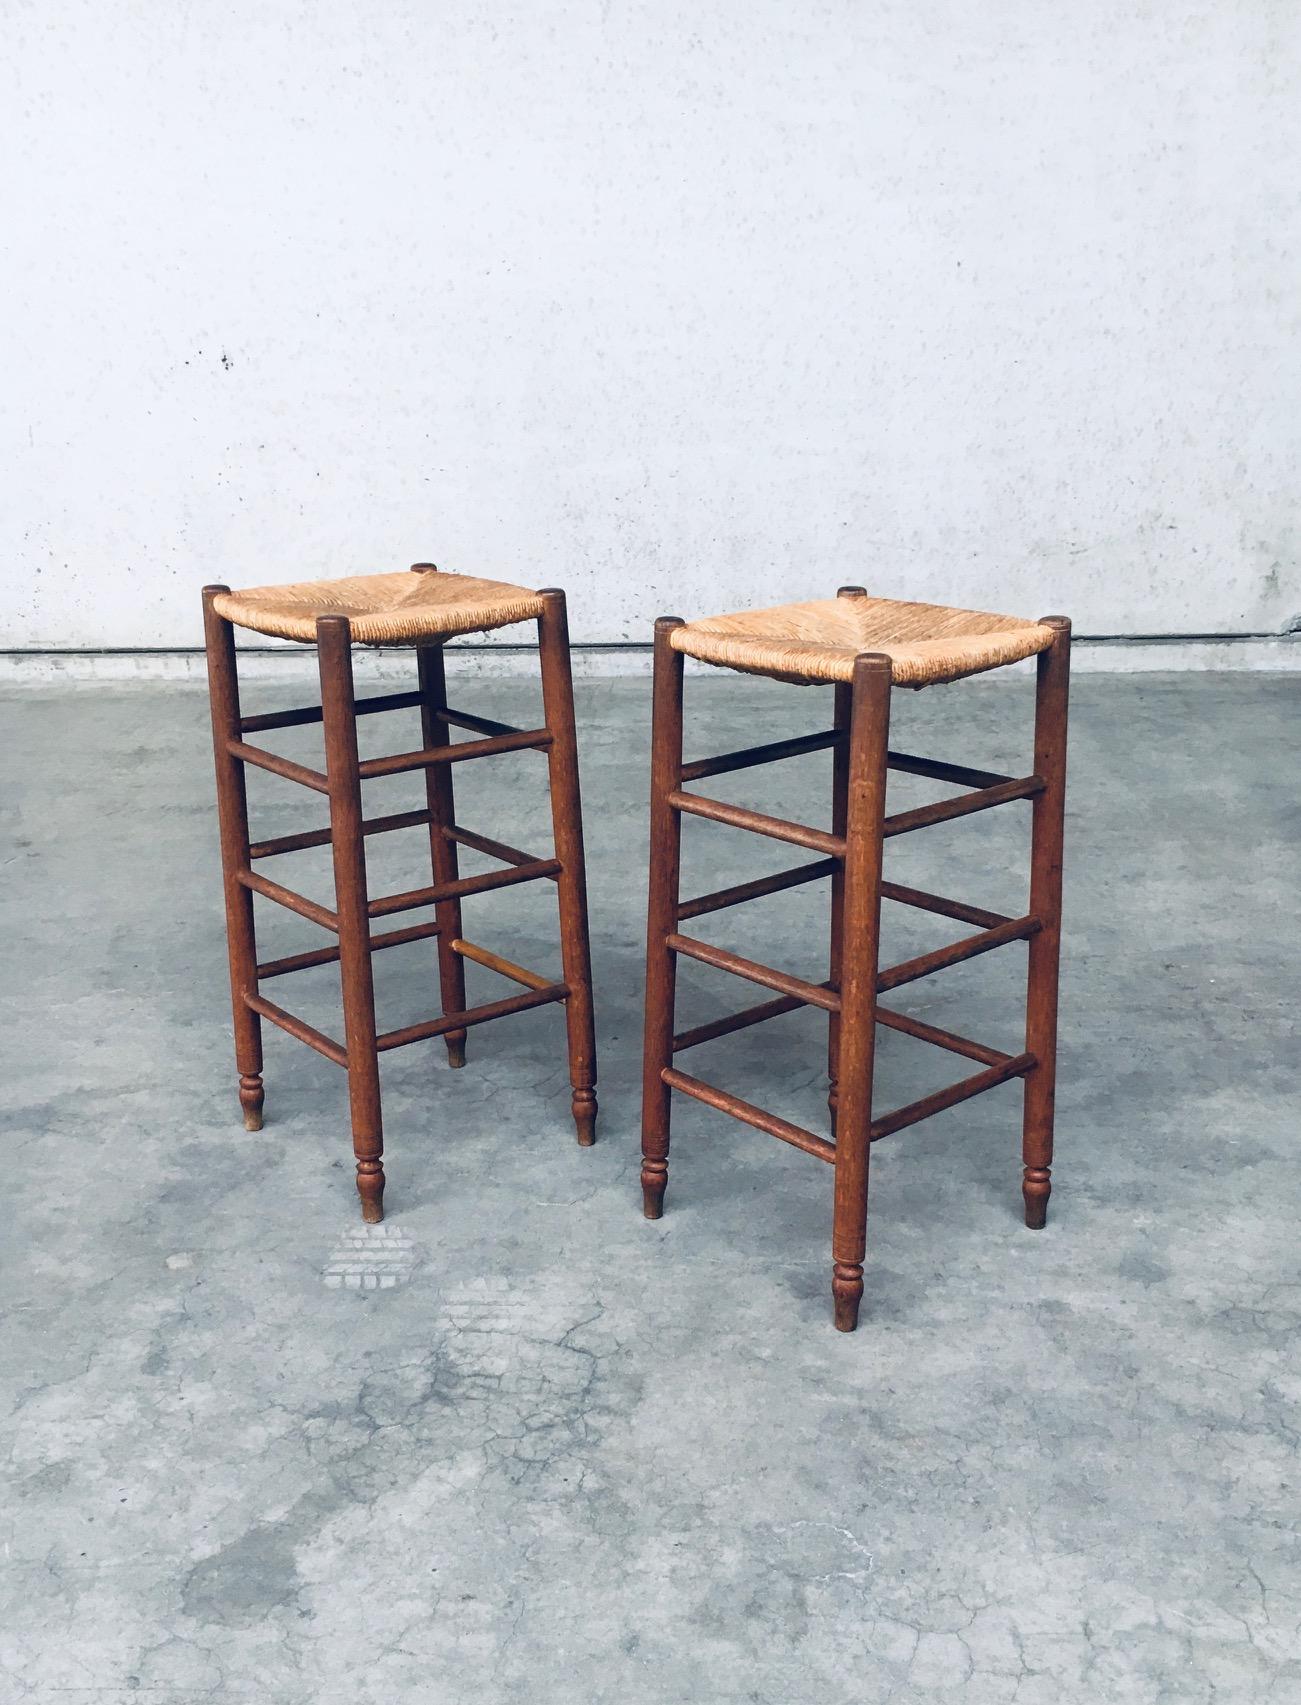 Vintage midcentury French Rustic made Bar Stool set in the style of Charlotte Perriand. Made in France, 1950s era. Solid oak constructed frame with rush woven seat. Both are in very good, original condition. Each stool measures 81cm x 37,5cm x